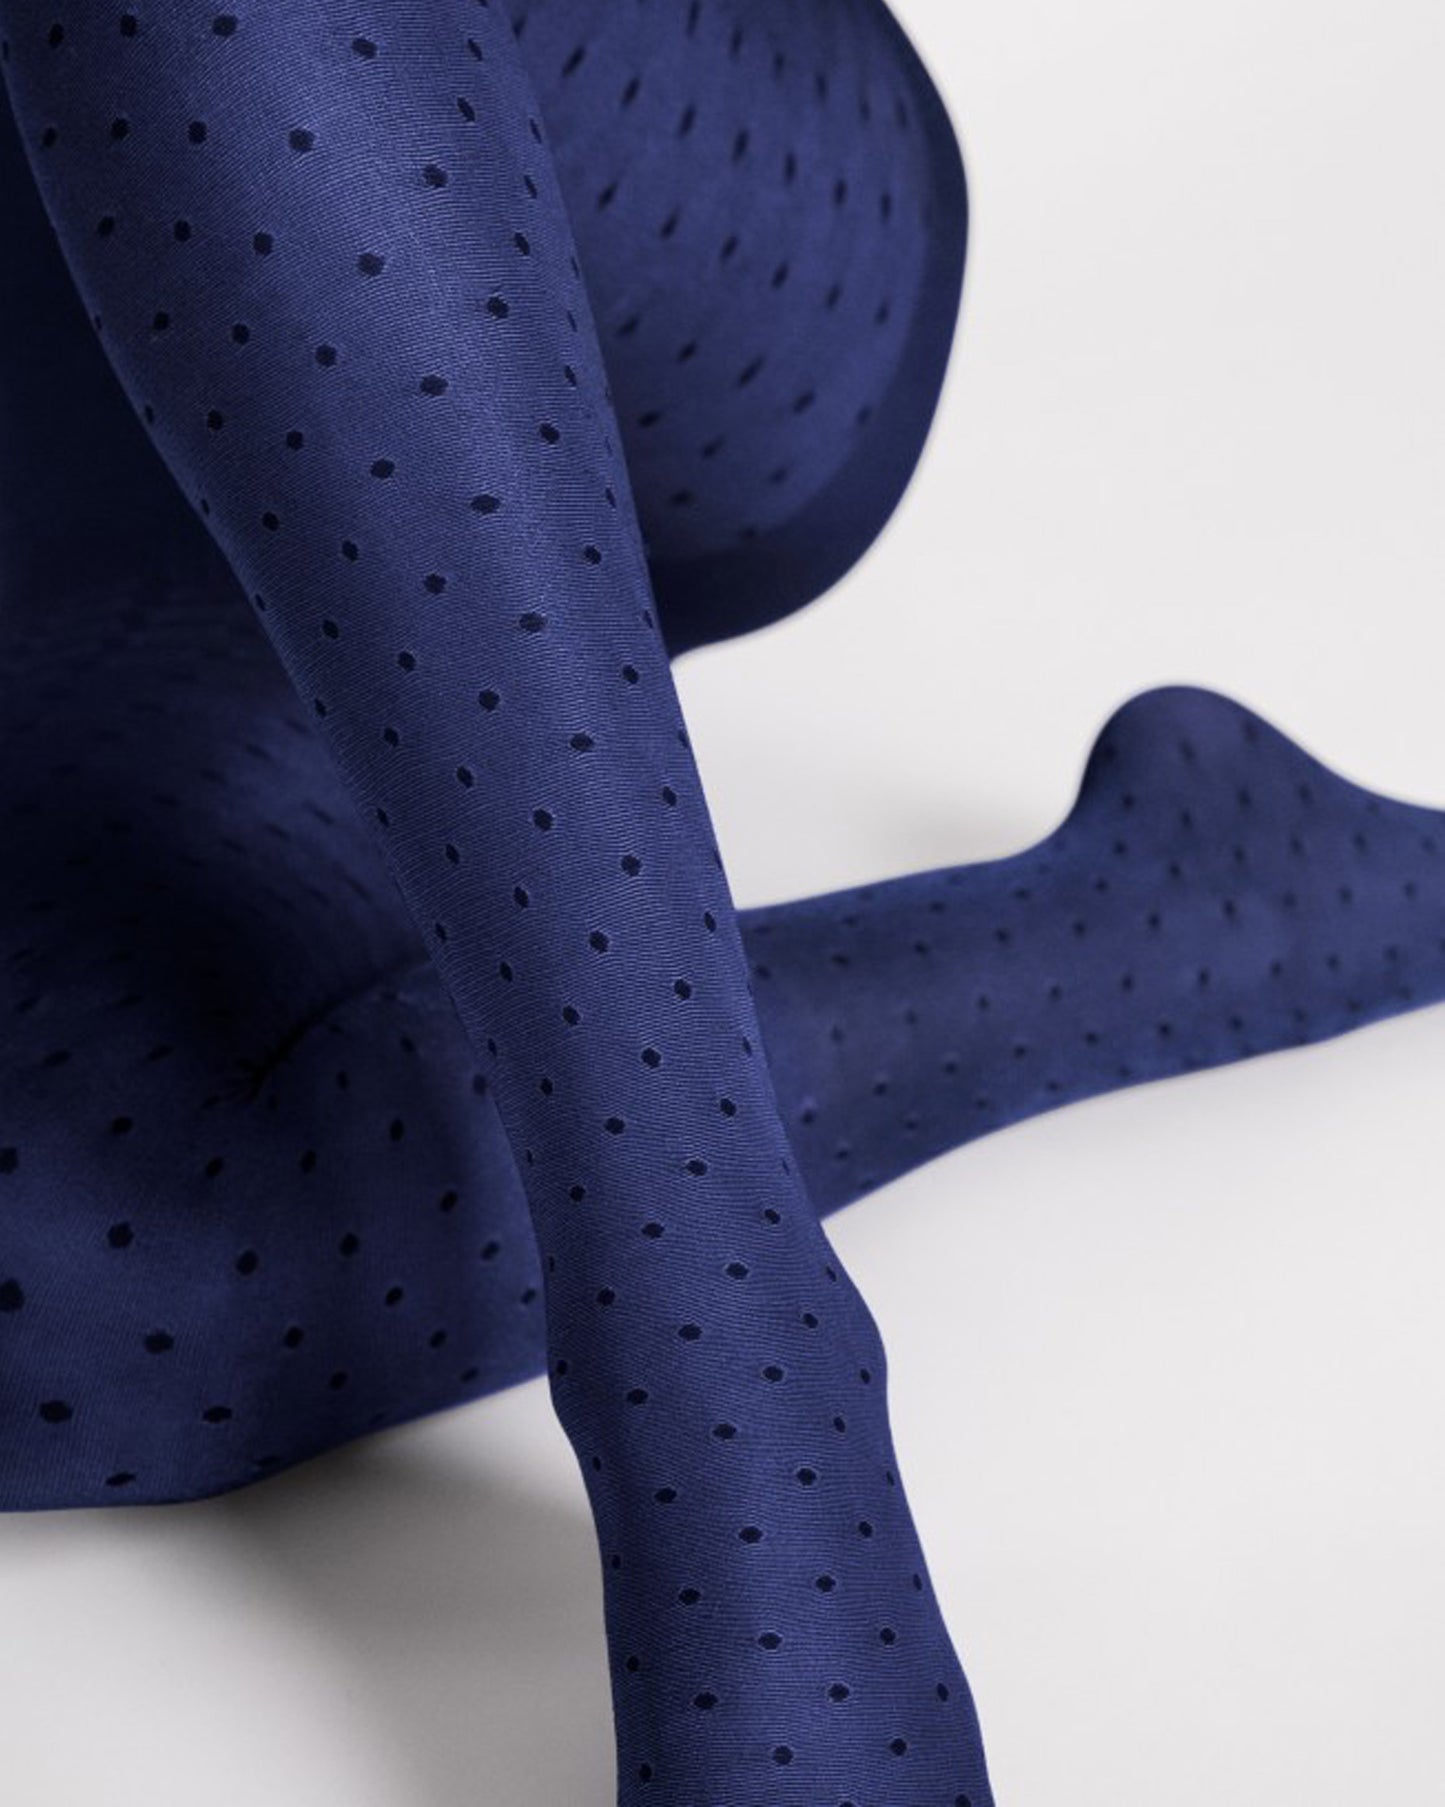 Fiore Dry Pastel Tights - Close up of a glossy navy opaque fashion tights with an all over light honeycomb and spot pattern in black.